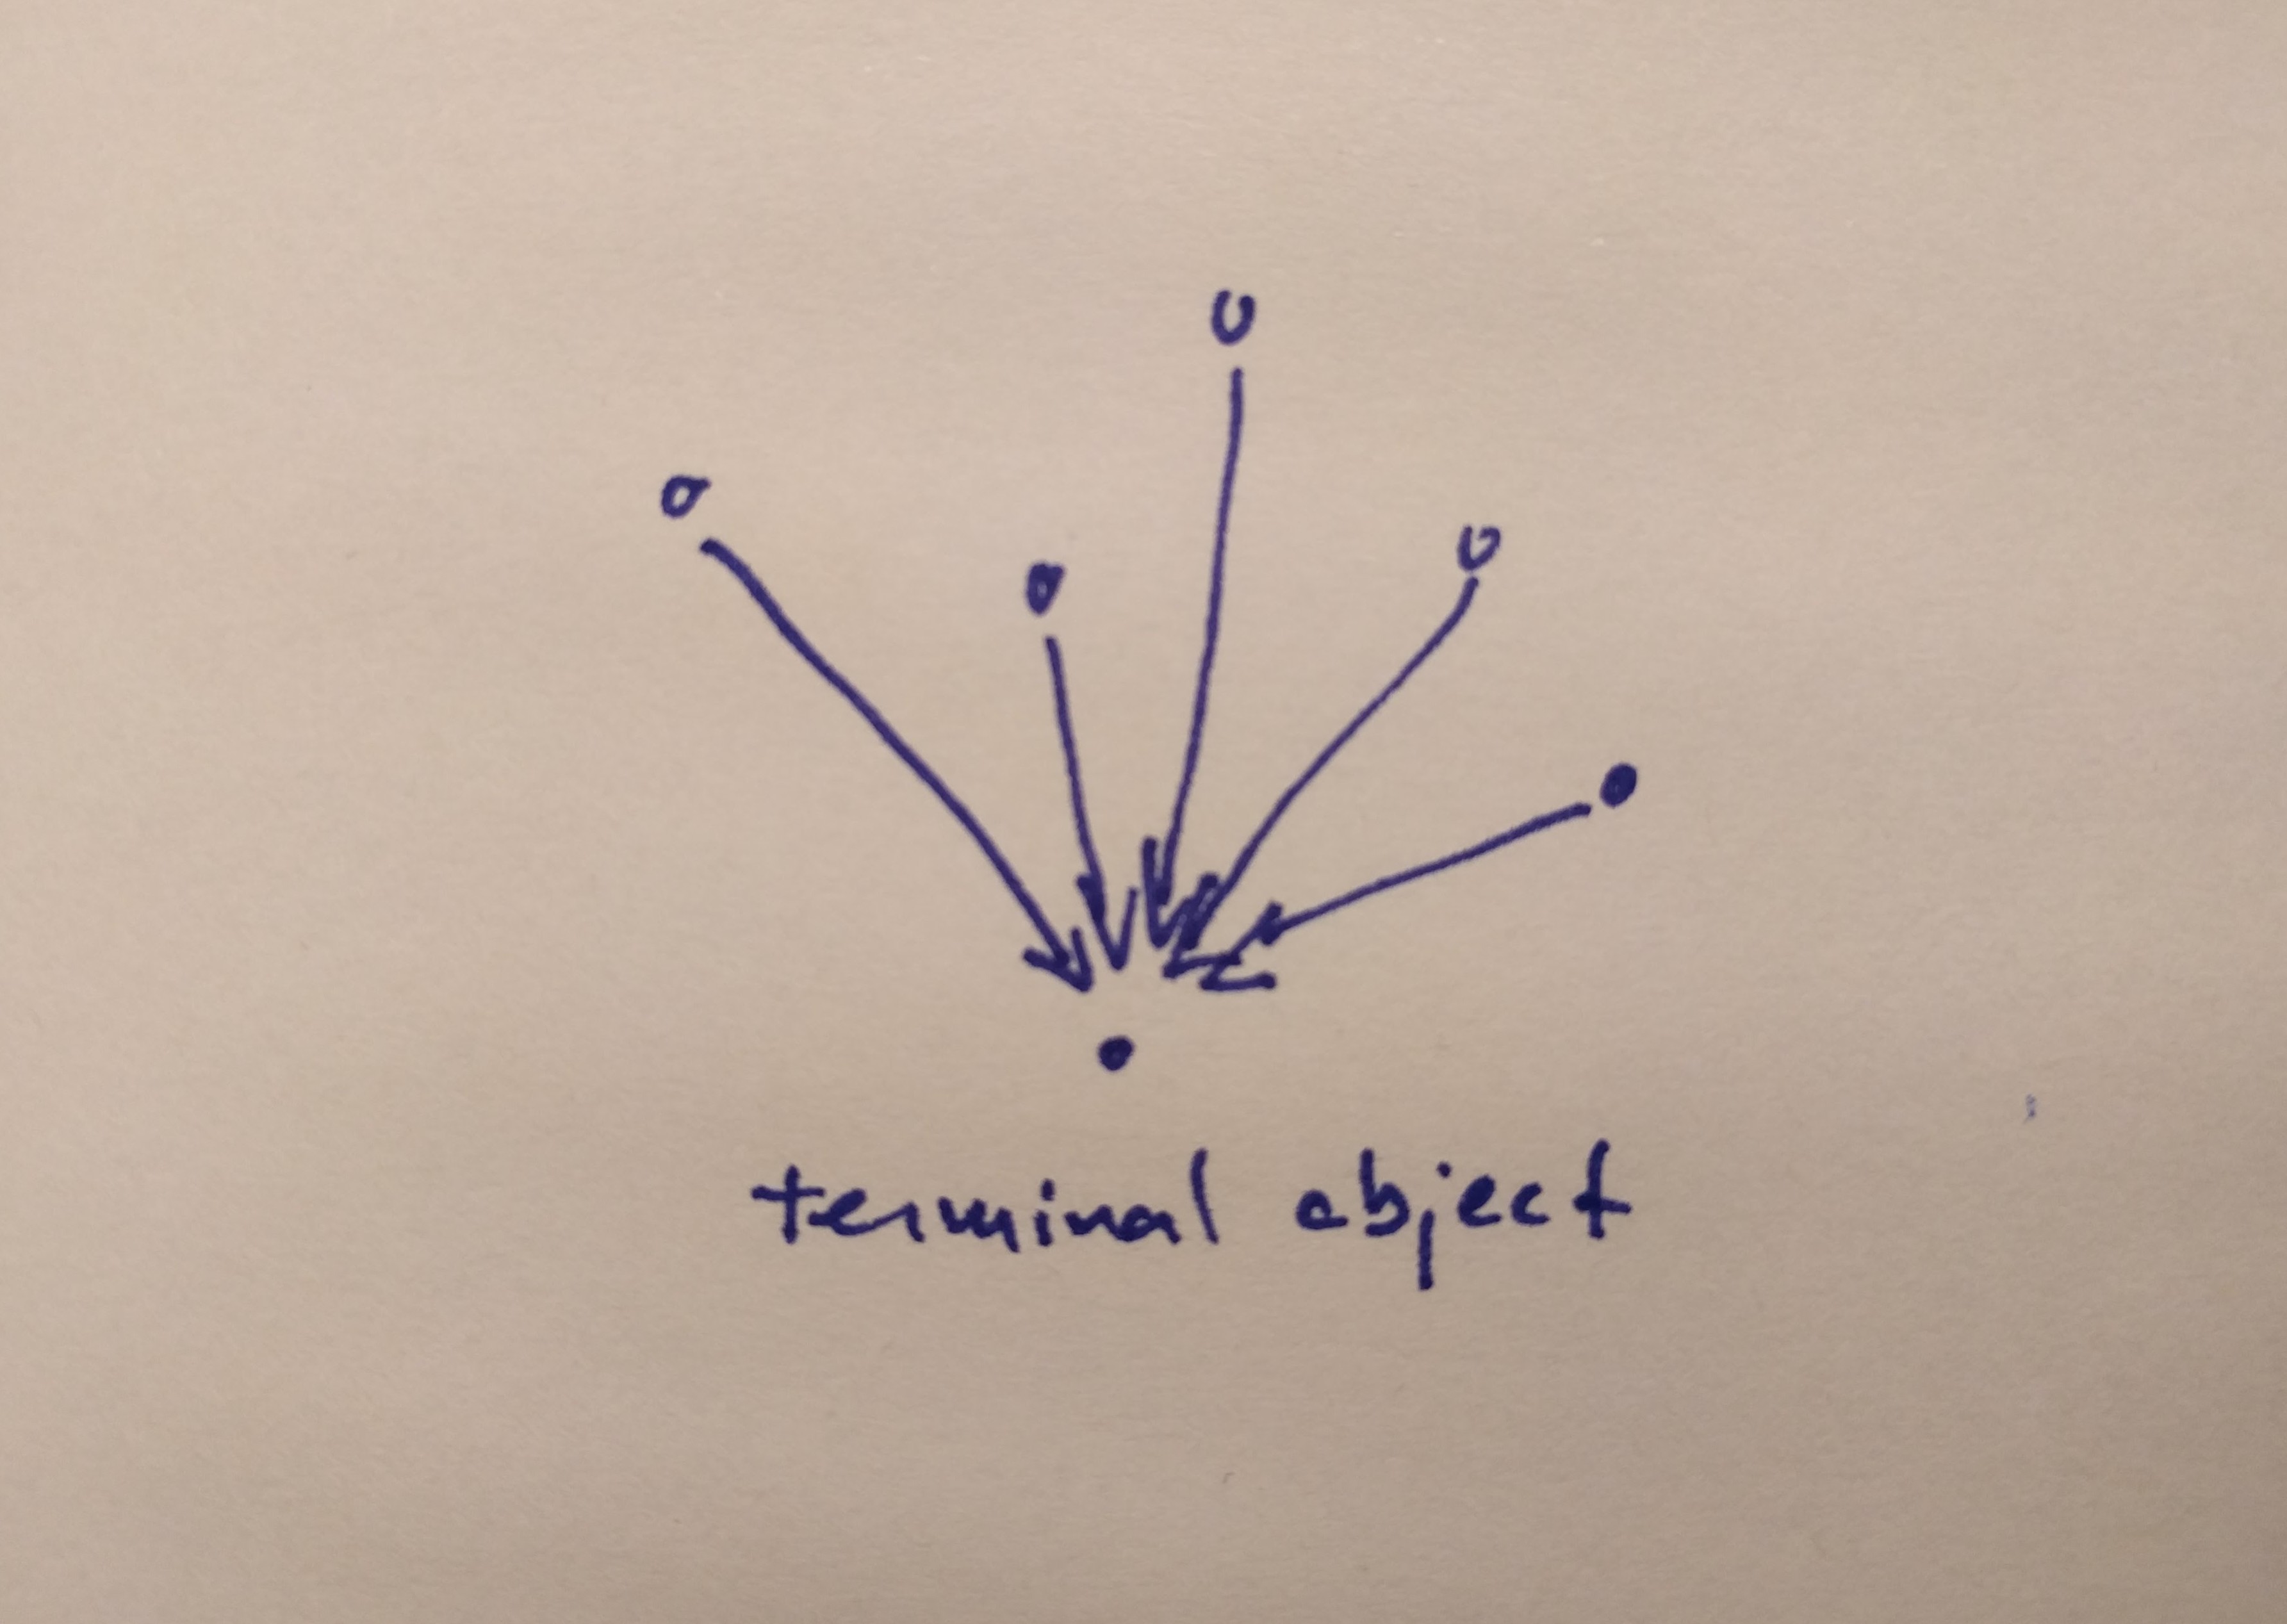 terminal object